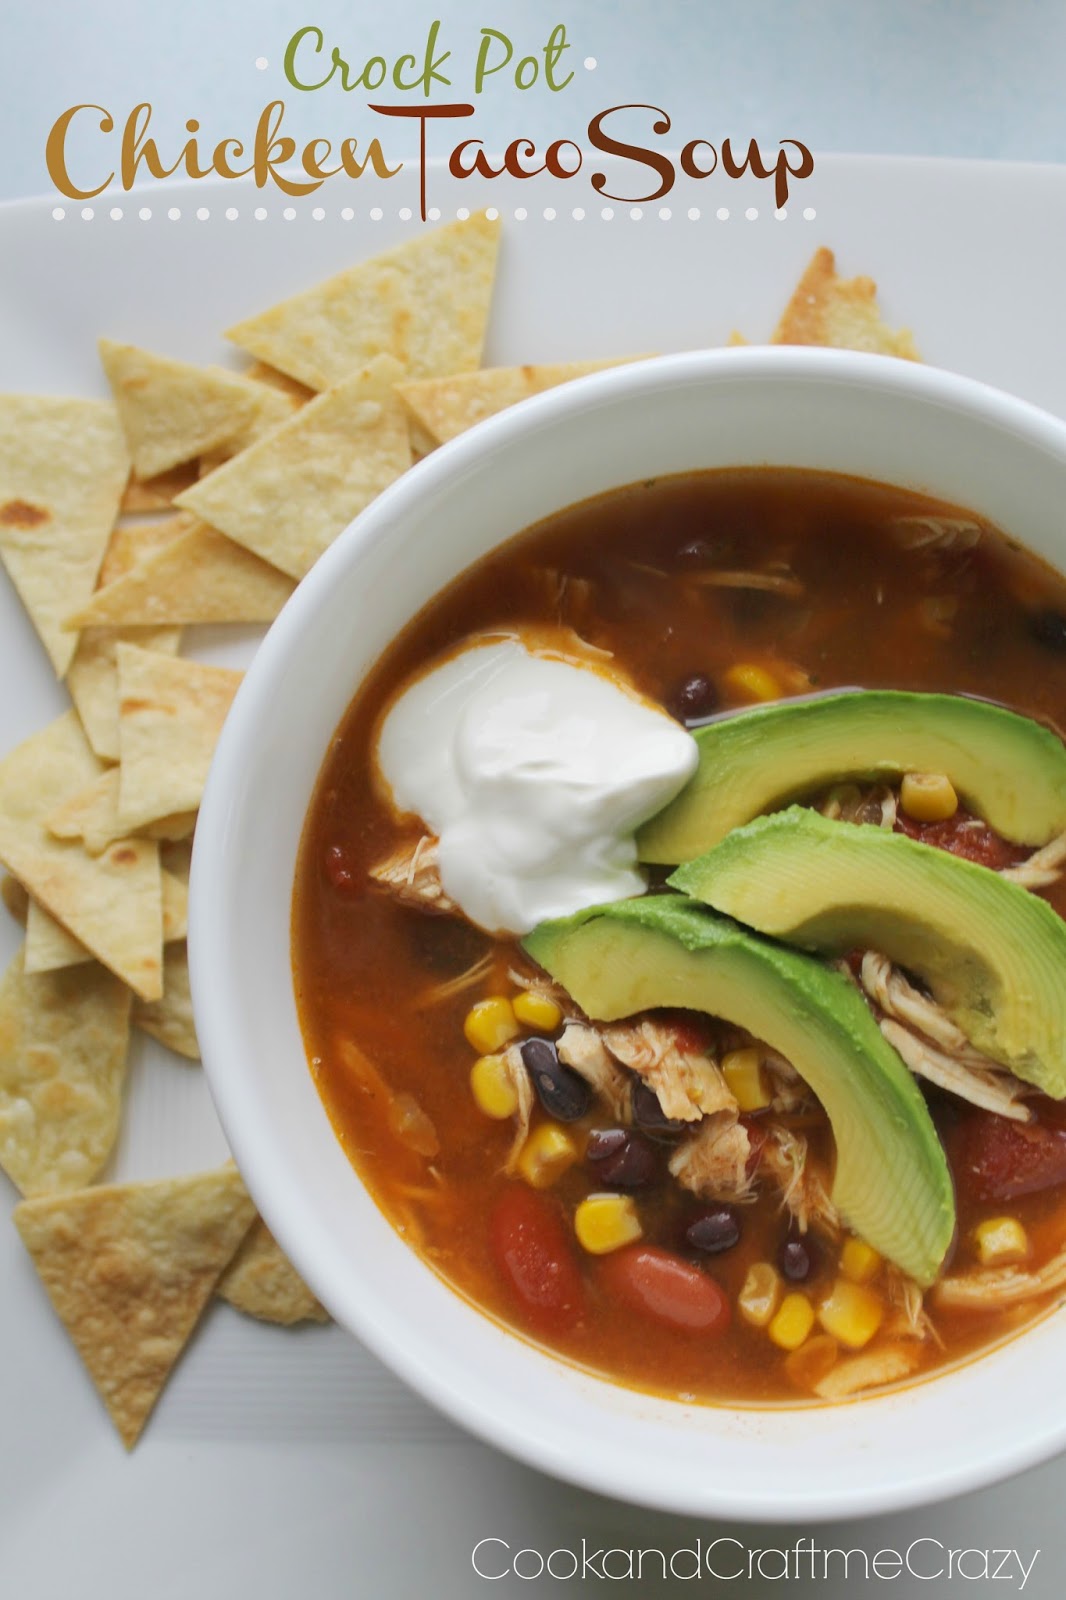 Cook and Craft Me Crazy: Crock Pot Chicken Taco Soup